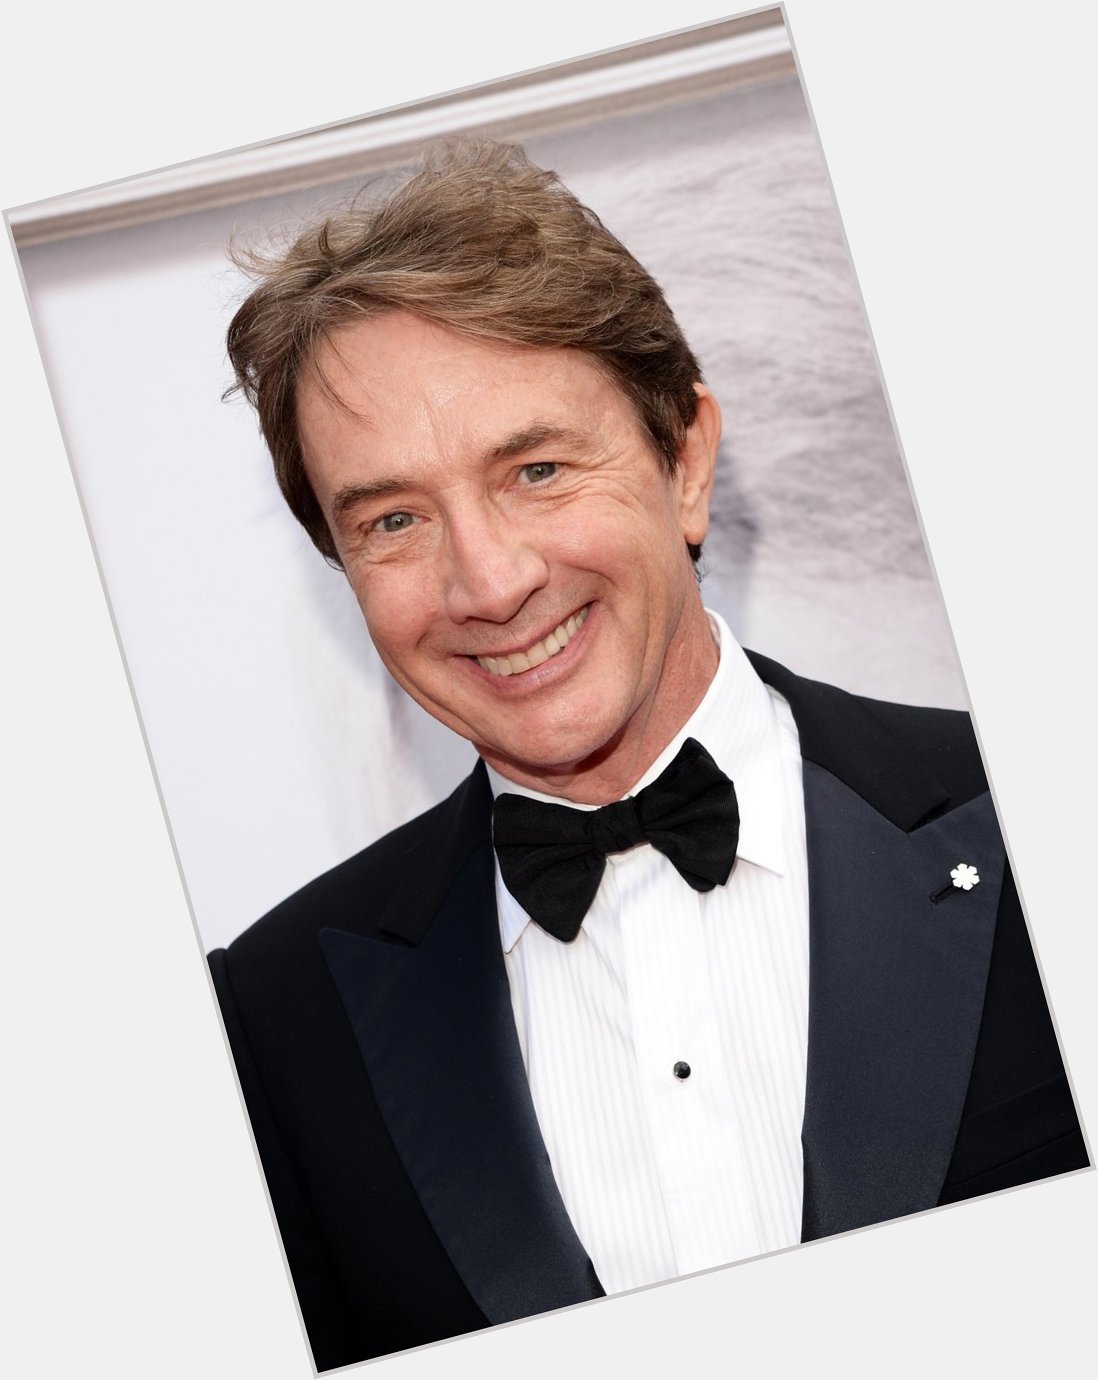 Happy Birthday to Martin Short   - What is your favorite Martin Short role? 